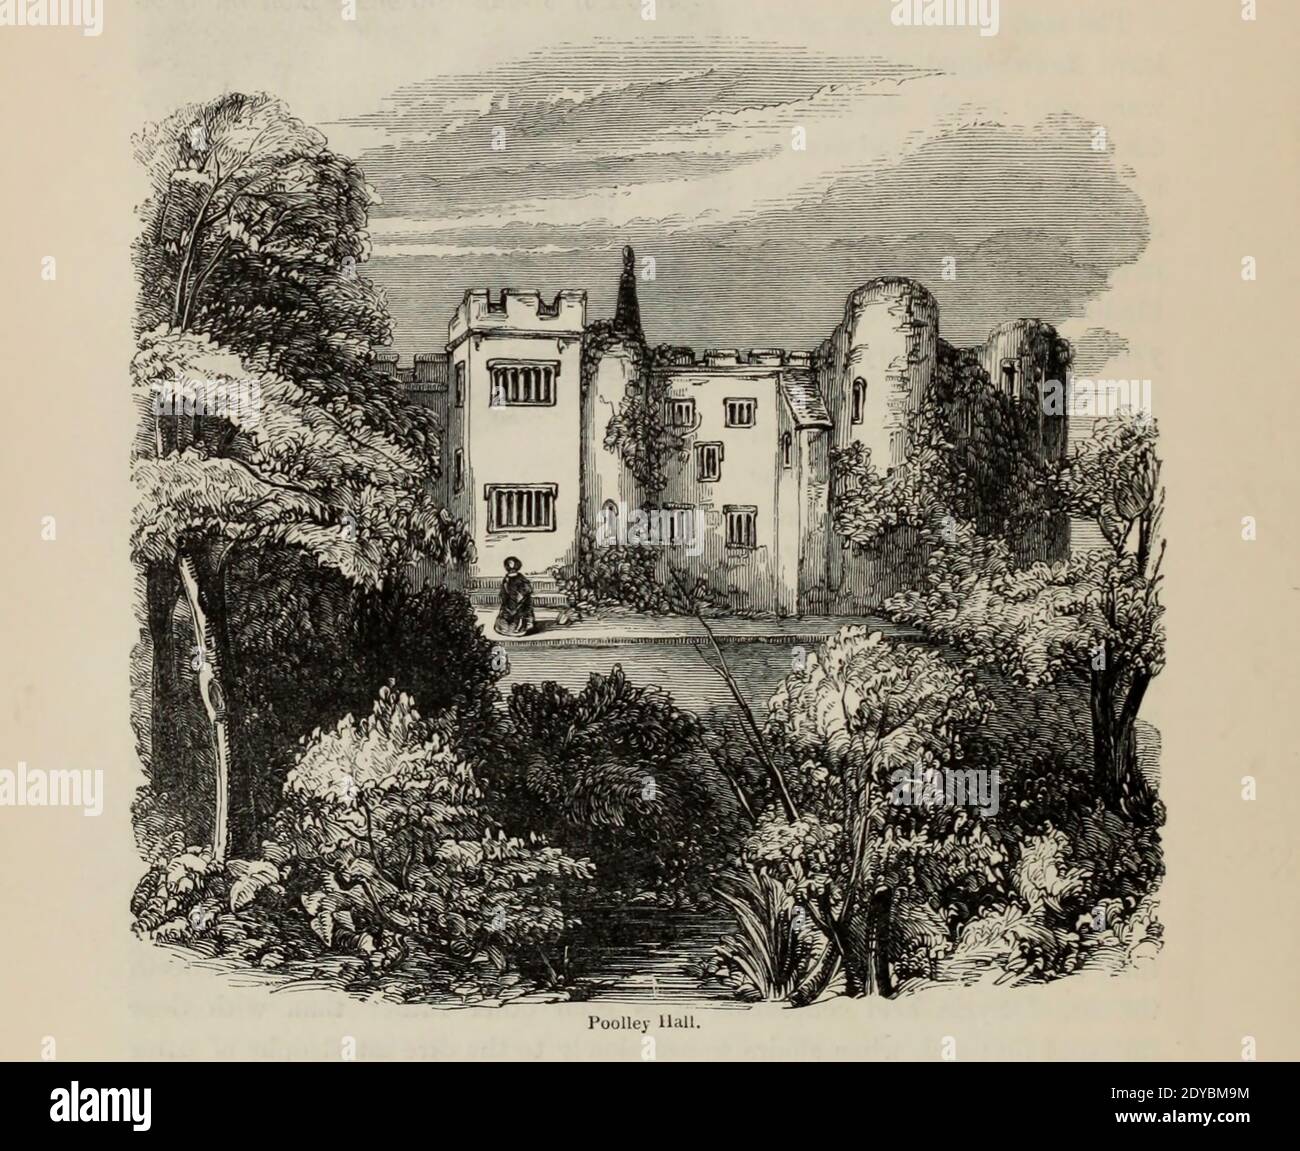 Poolley Hall From the book The wanderings of a pen and pencil by Palmer, F. P. (Francis Paul); Illustrated by Crowquill, Alfred, [Alfred Henry Forrester]  Published in London by Jeremiah How in 1846 Stock Photo